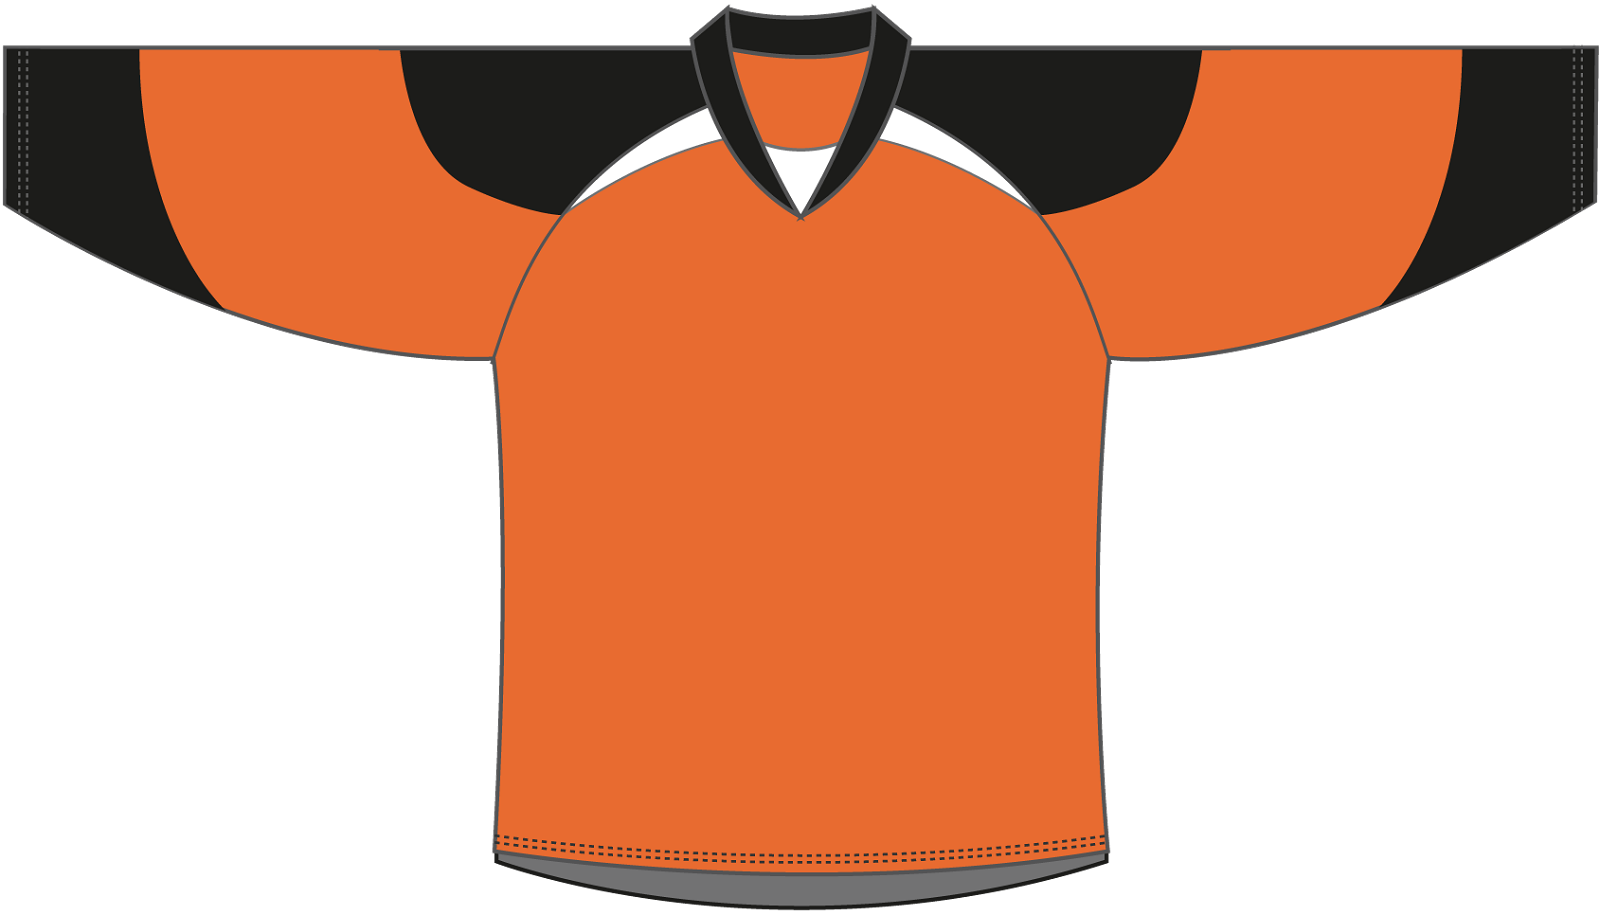 Download Jersey clipart team jersey, Jersey team jersey Transparent FREE for download on WebStockReview 2020